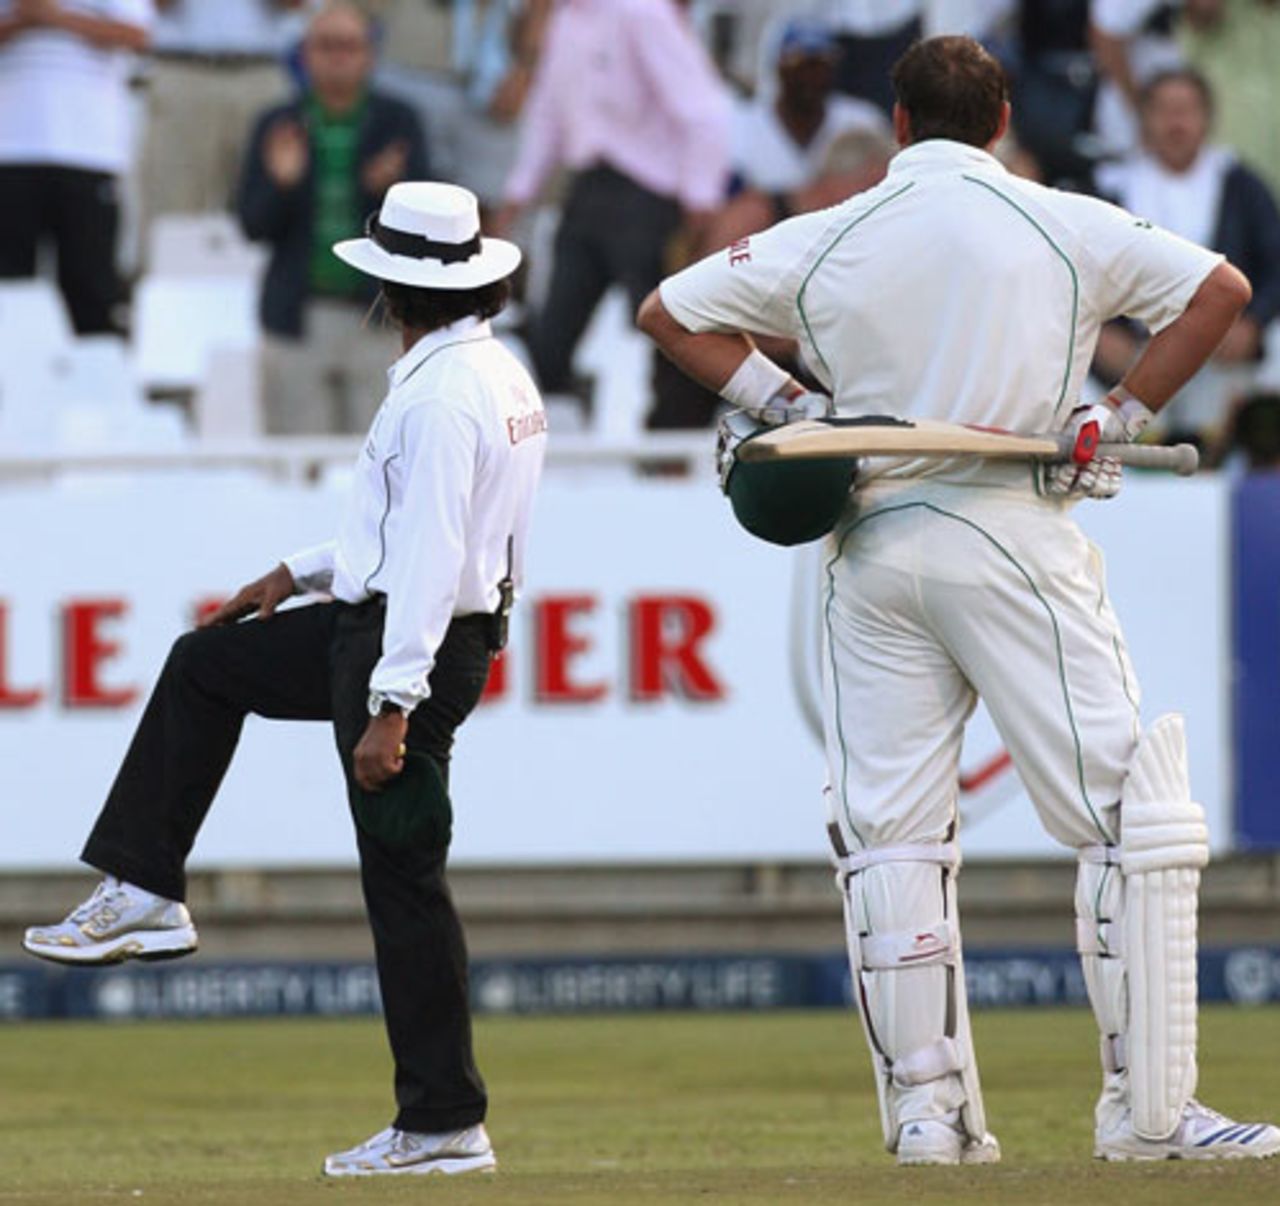 What Jacques Kallis thought was his 100th run is ruled a leg-bye by Asad Rauf, South Africa v Australia, 3rd Test, 2nd day, Cape Town, March 20, 2009